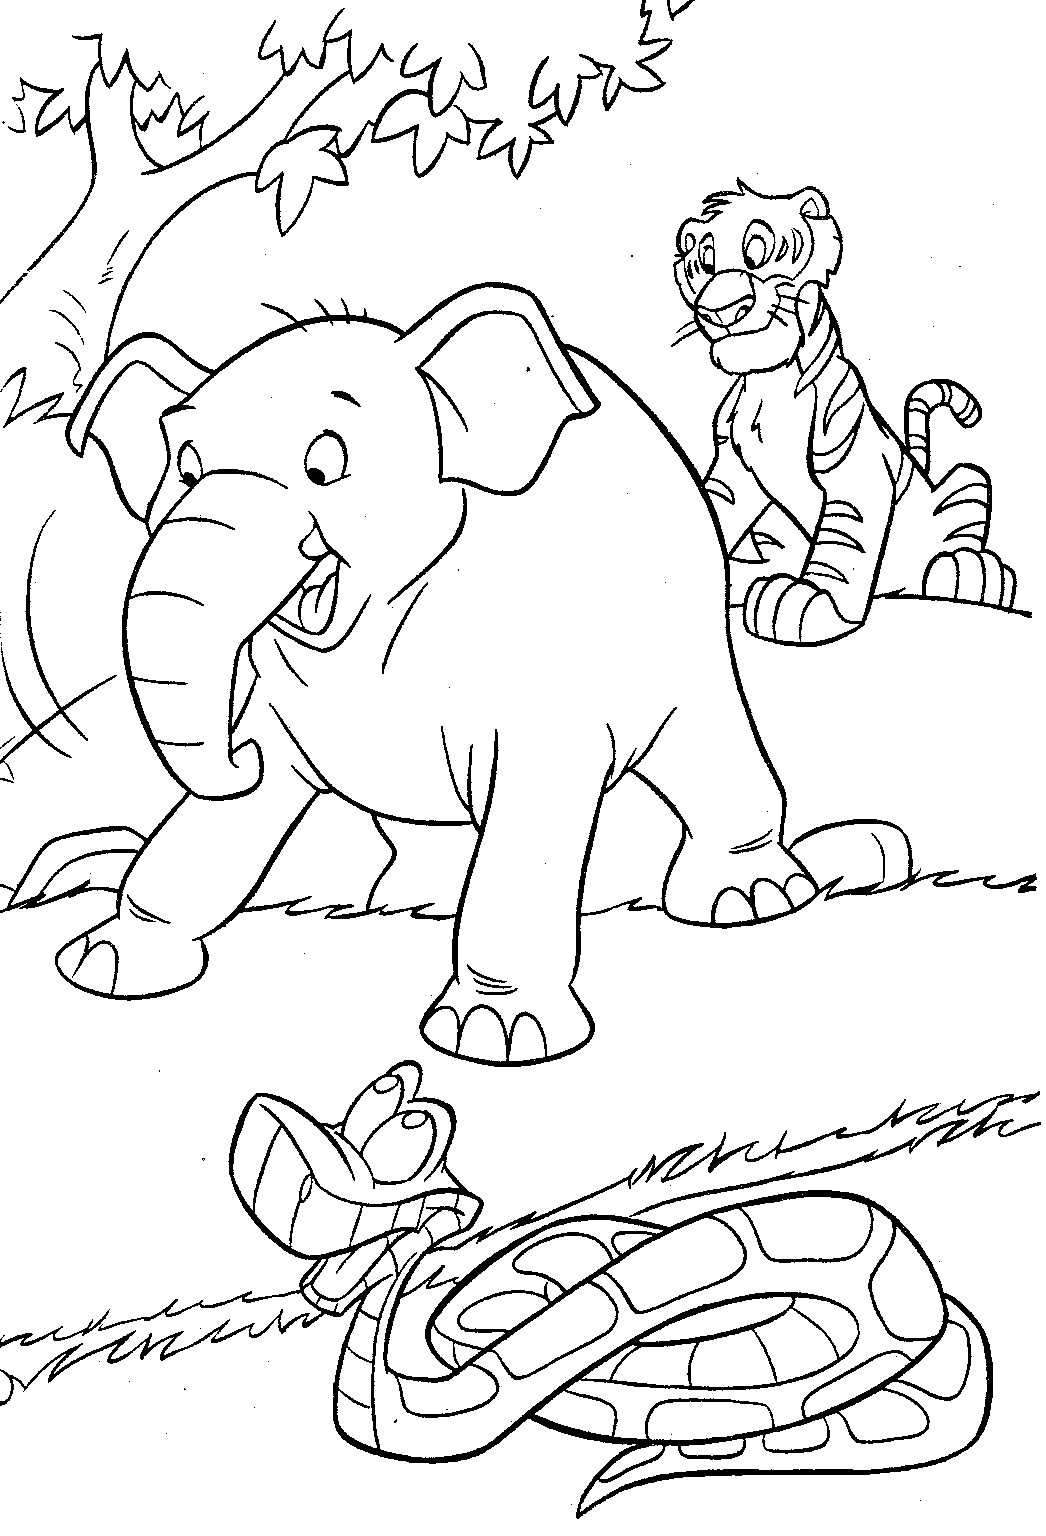 Free Jungle Animals Coloring Pages Free, Download Free Jungle Animals